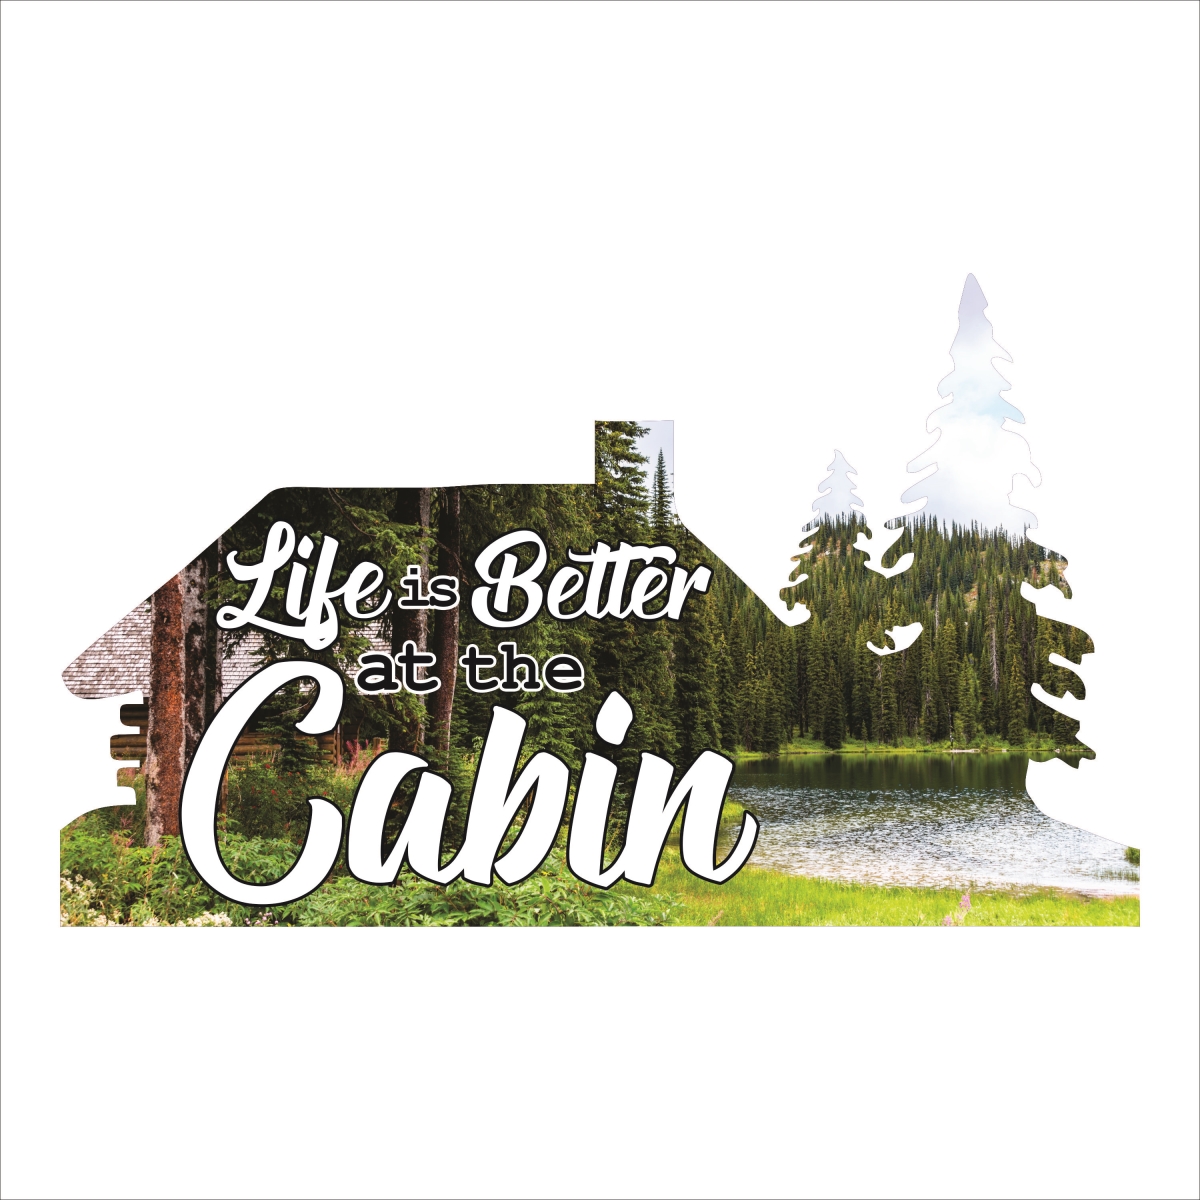 Lifeisbetter-18cabin 18 In. Leisure Cabin Silhouette Metal Laser Cut Wall Art With Vivid Cabin Lake Image Life Is Better At The Cabin